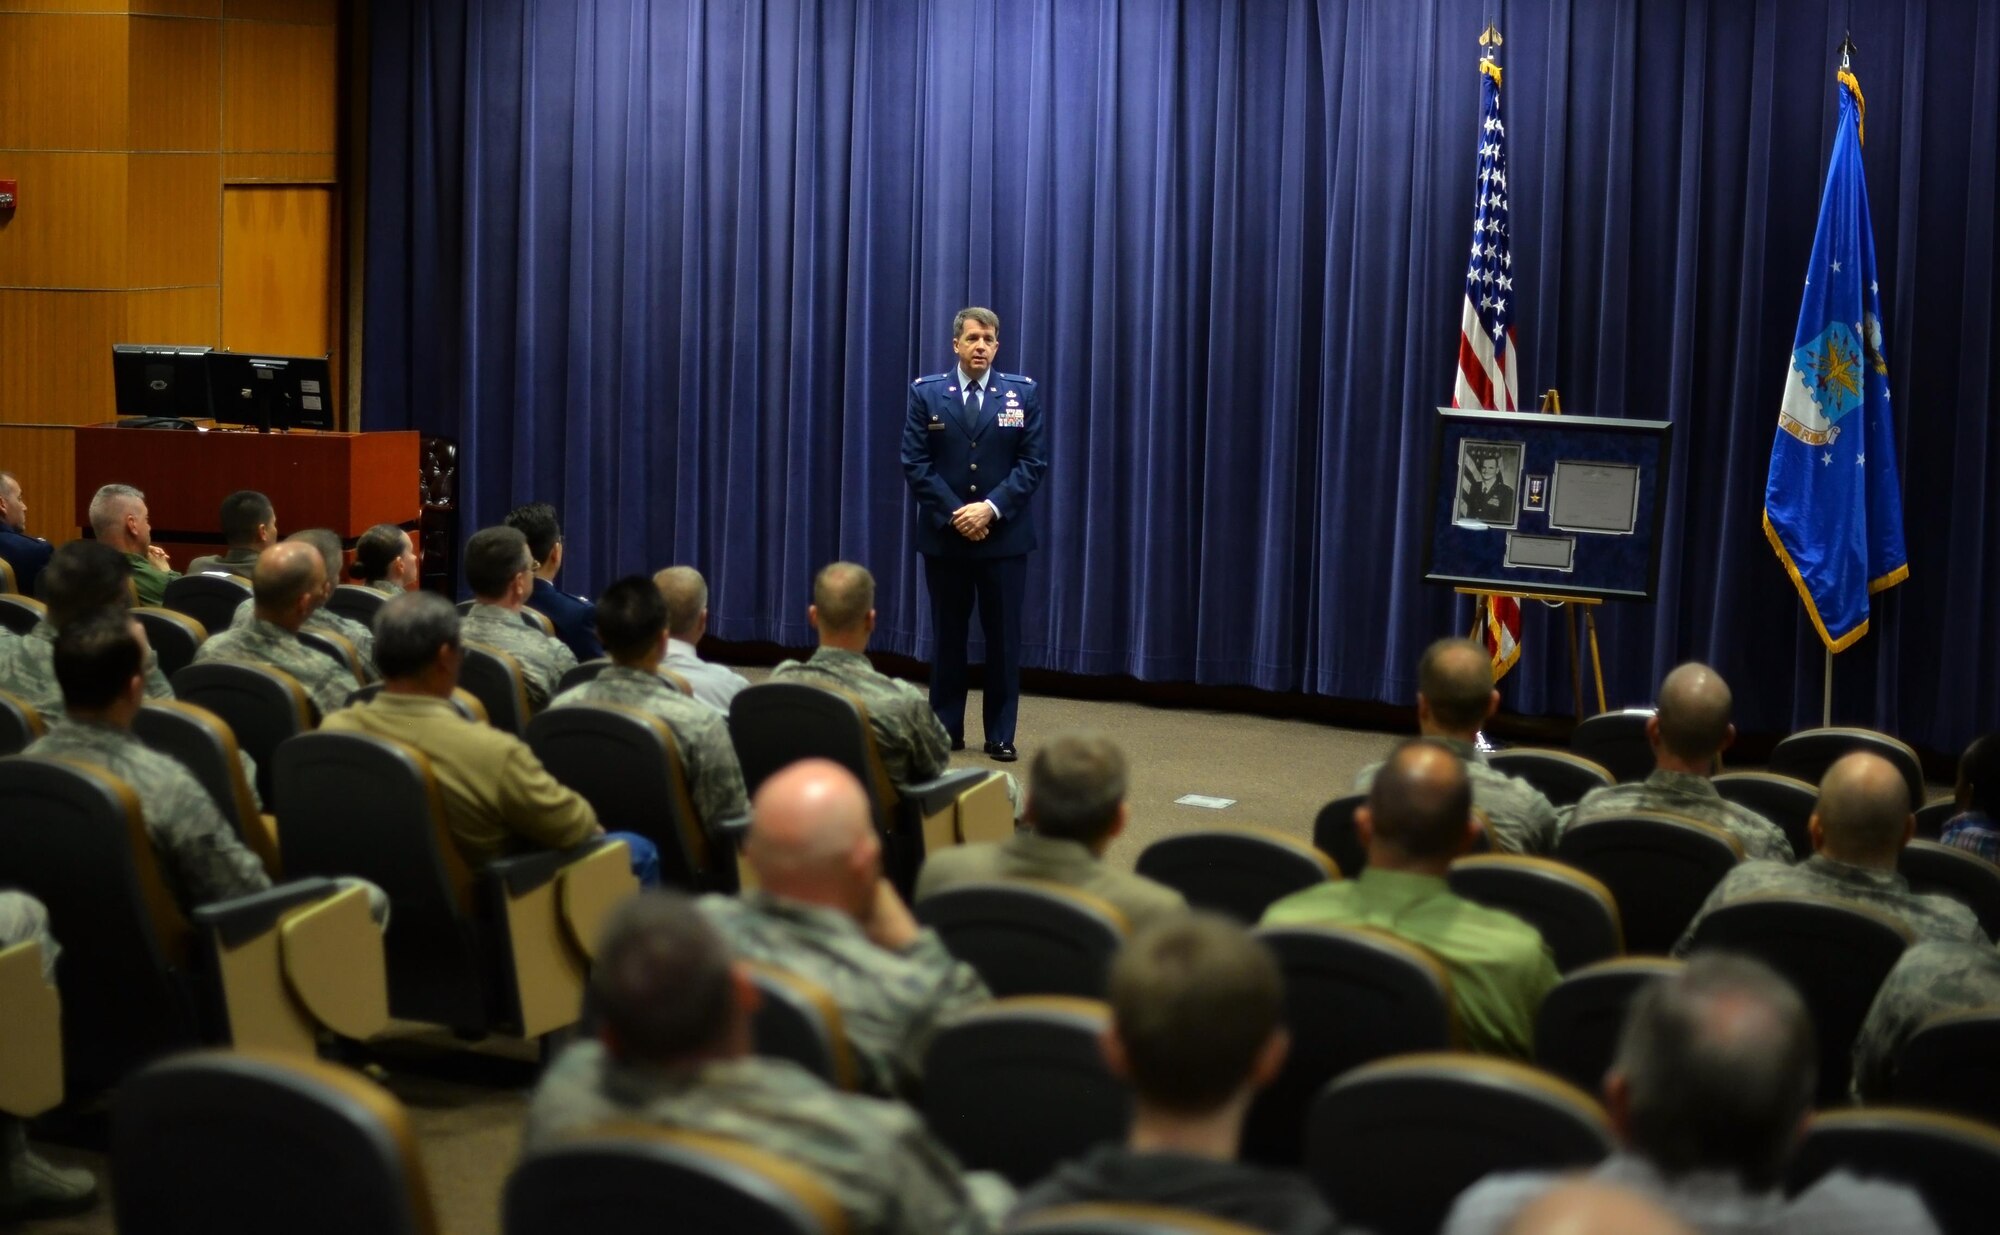 U.S. Air Force Col. Donald Shannon, 2nd Weather Group commander, speaks to weather professionals during a memorial ceremony in honor of U.S. Air Force Capt. Nathan Nylander at the 557th Weather Wing auditorium, Offutt Air Force Base, Neb., April 27, 2016.  Nyalnder was killed at Kabul International Airport on April 27, 2011. (U.S. Air Force photo by Josh Plueger)